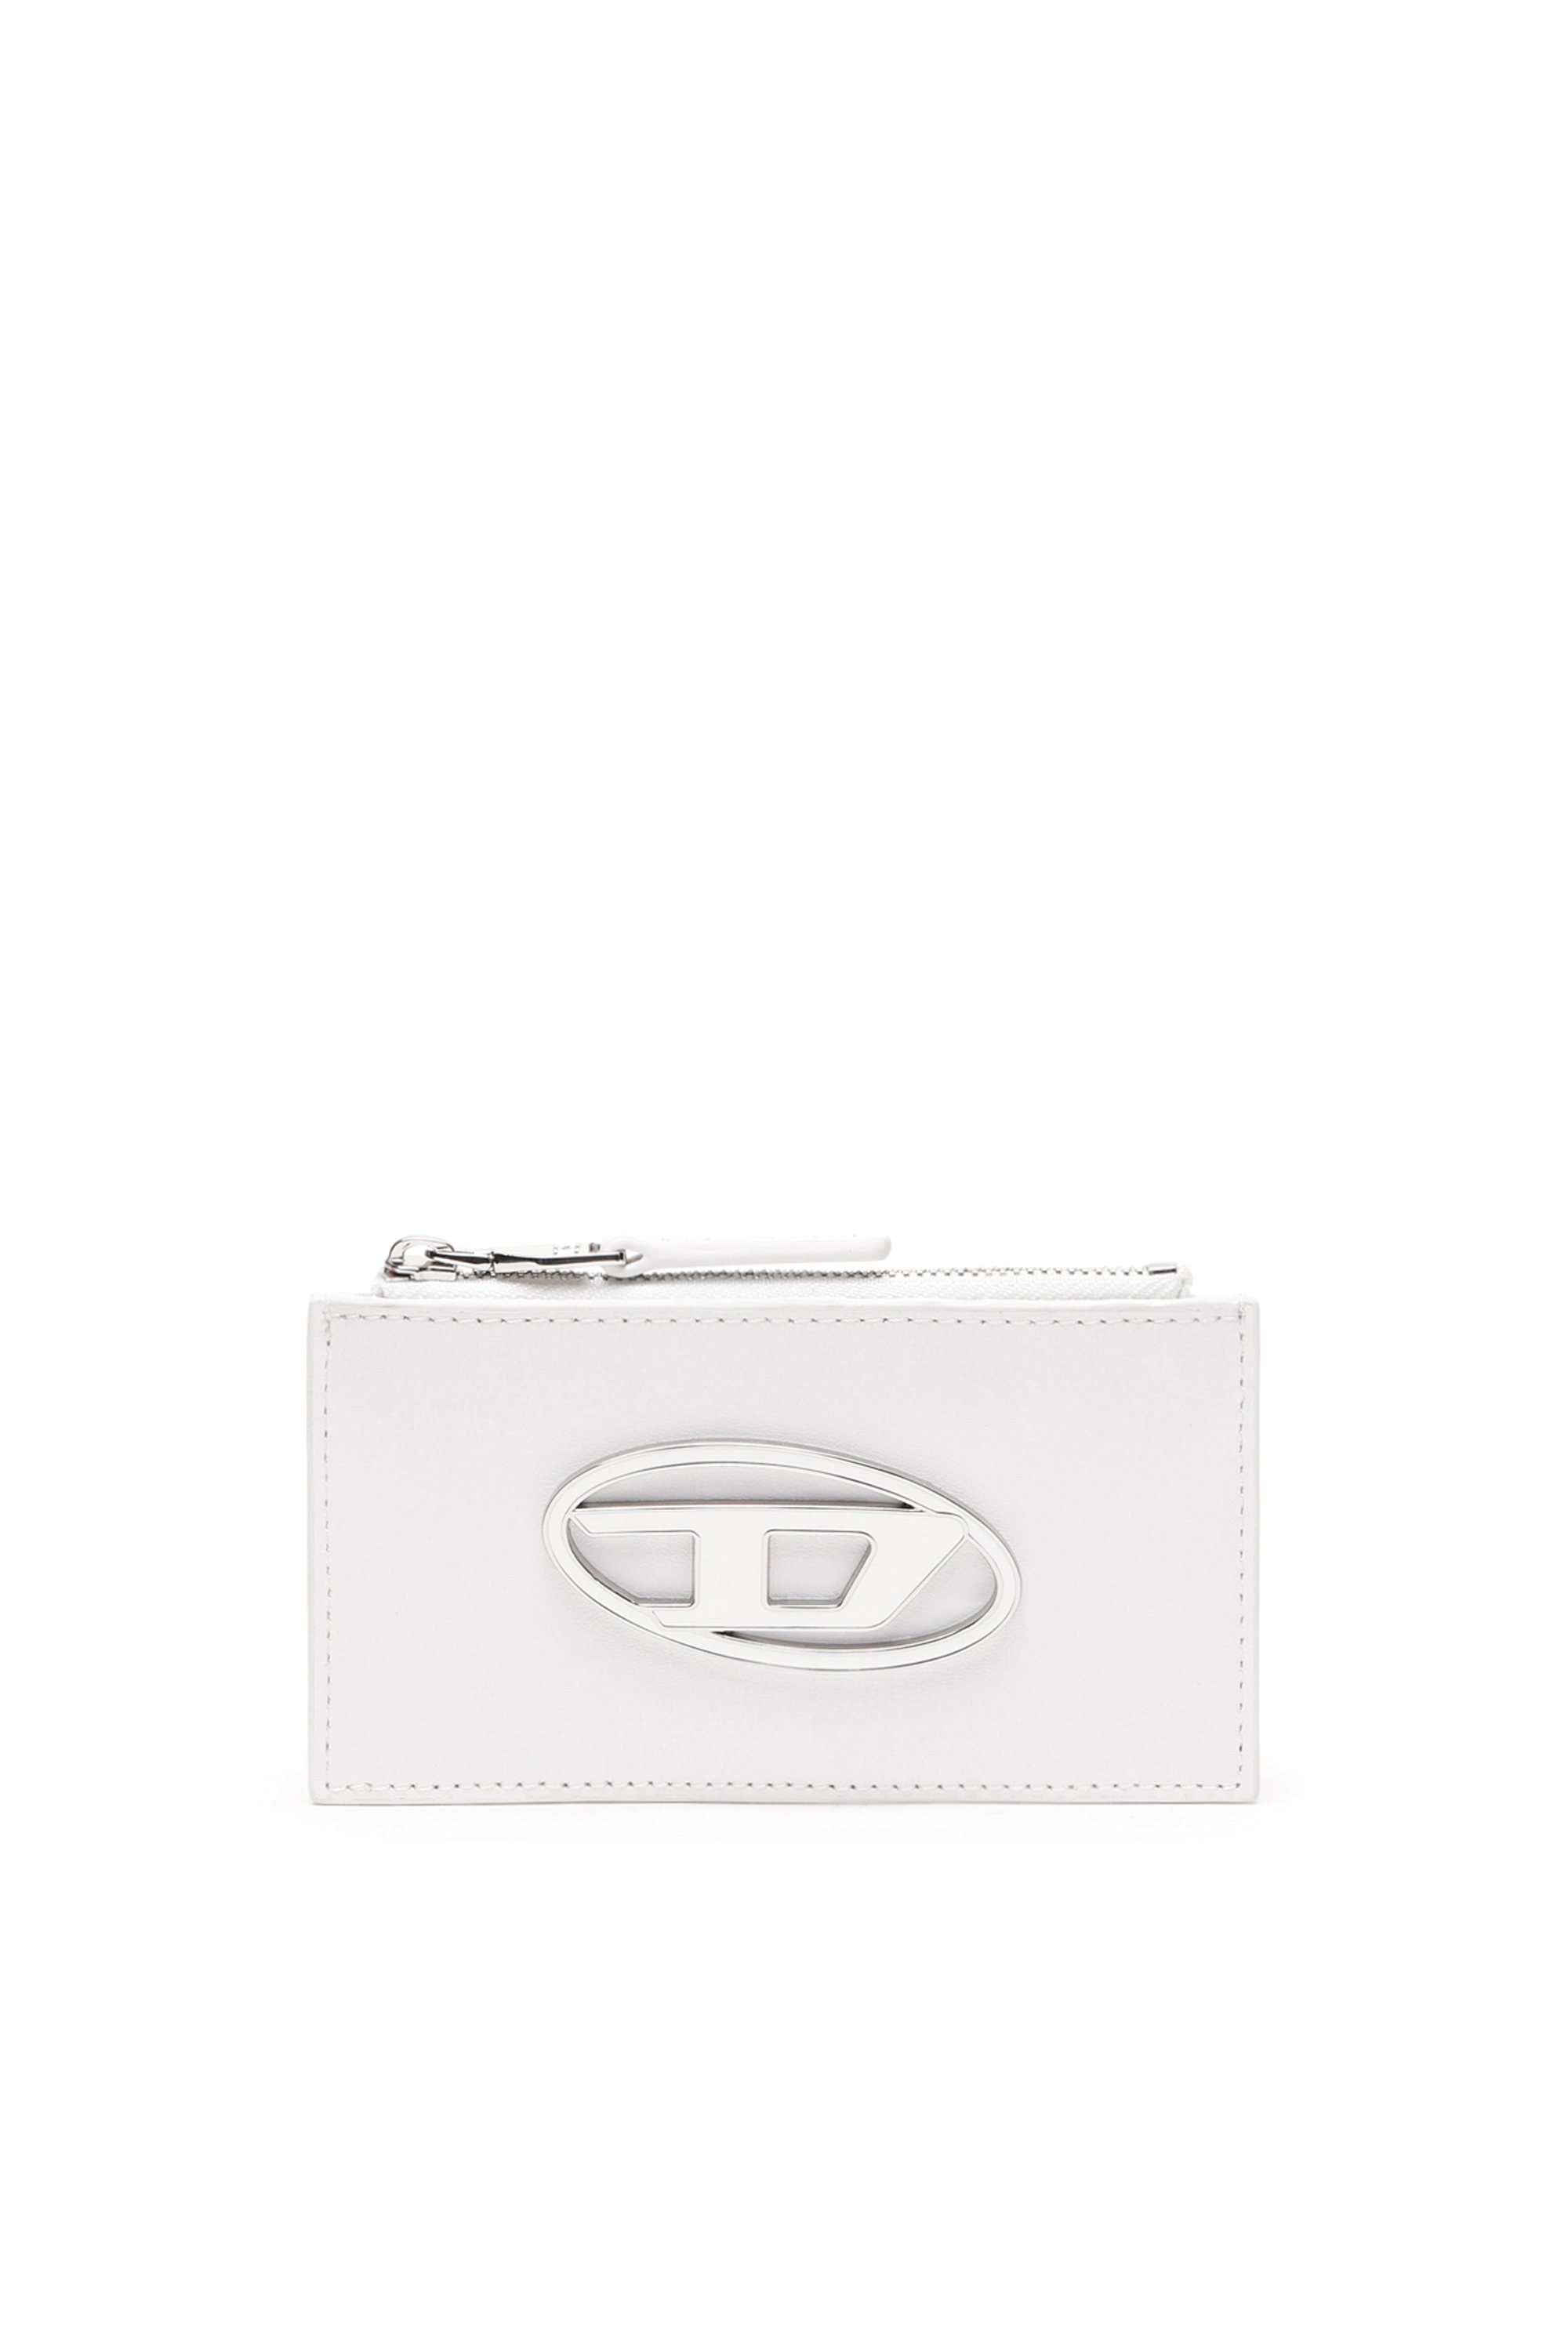 Diesel - PAOULINA, White - Image 1